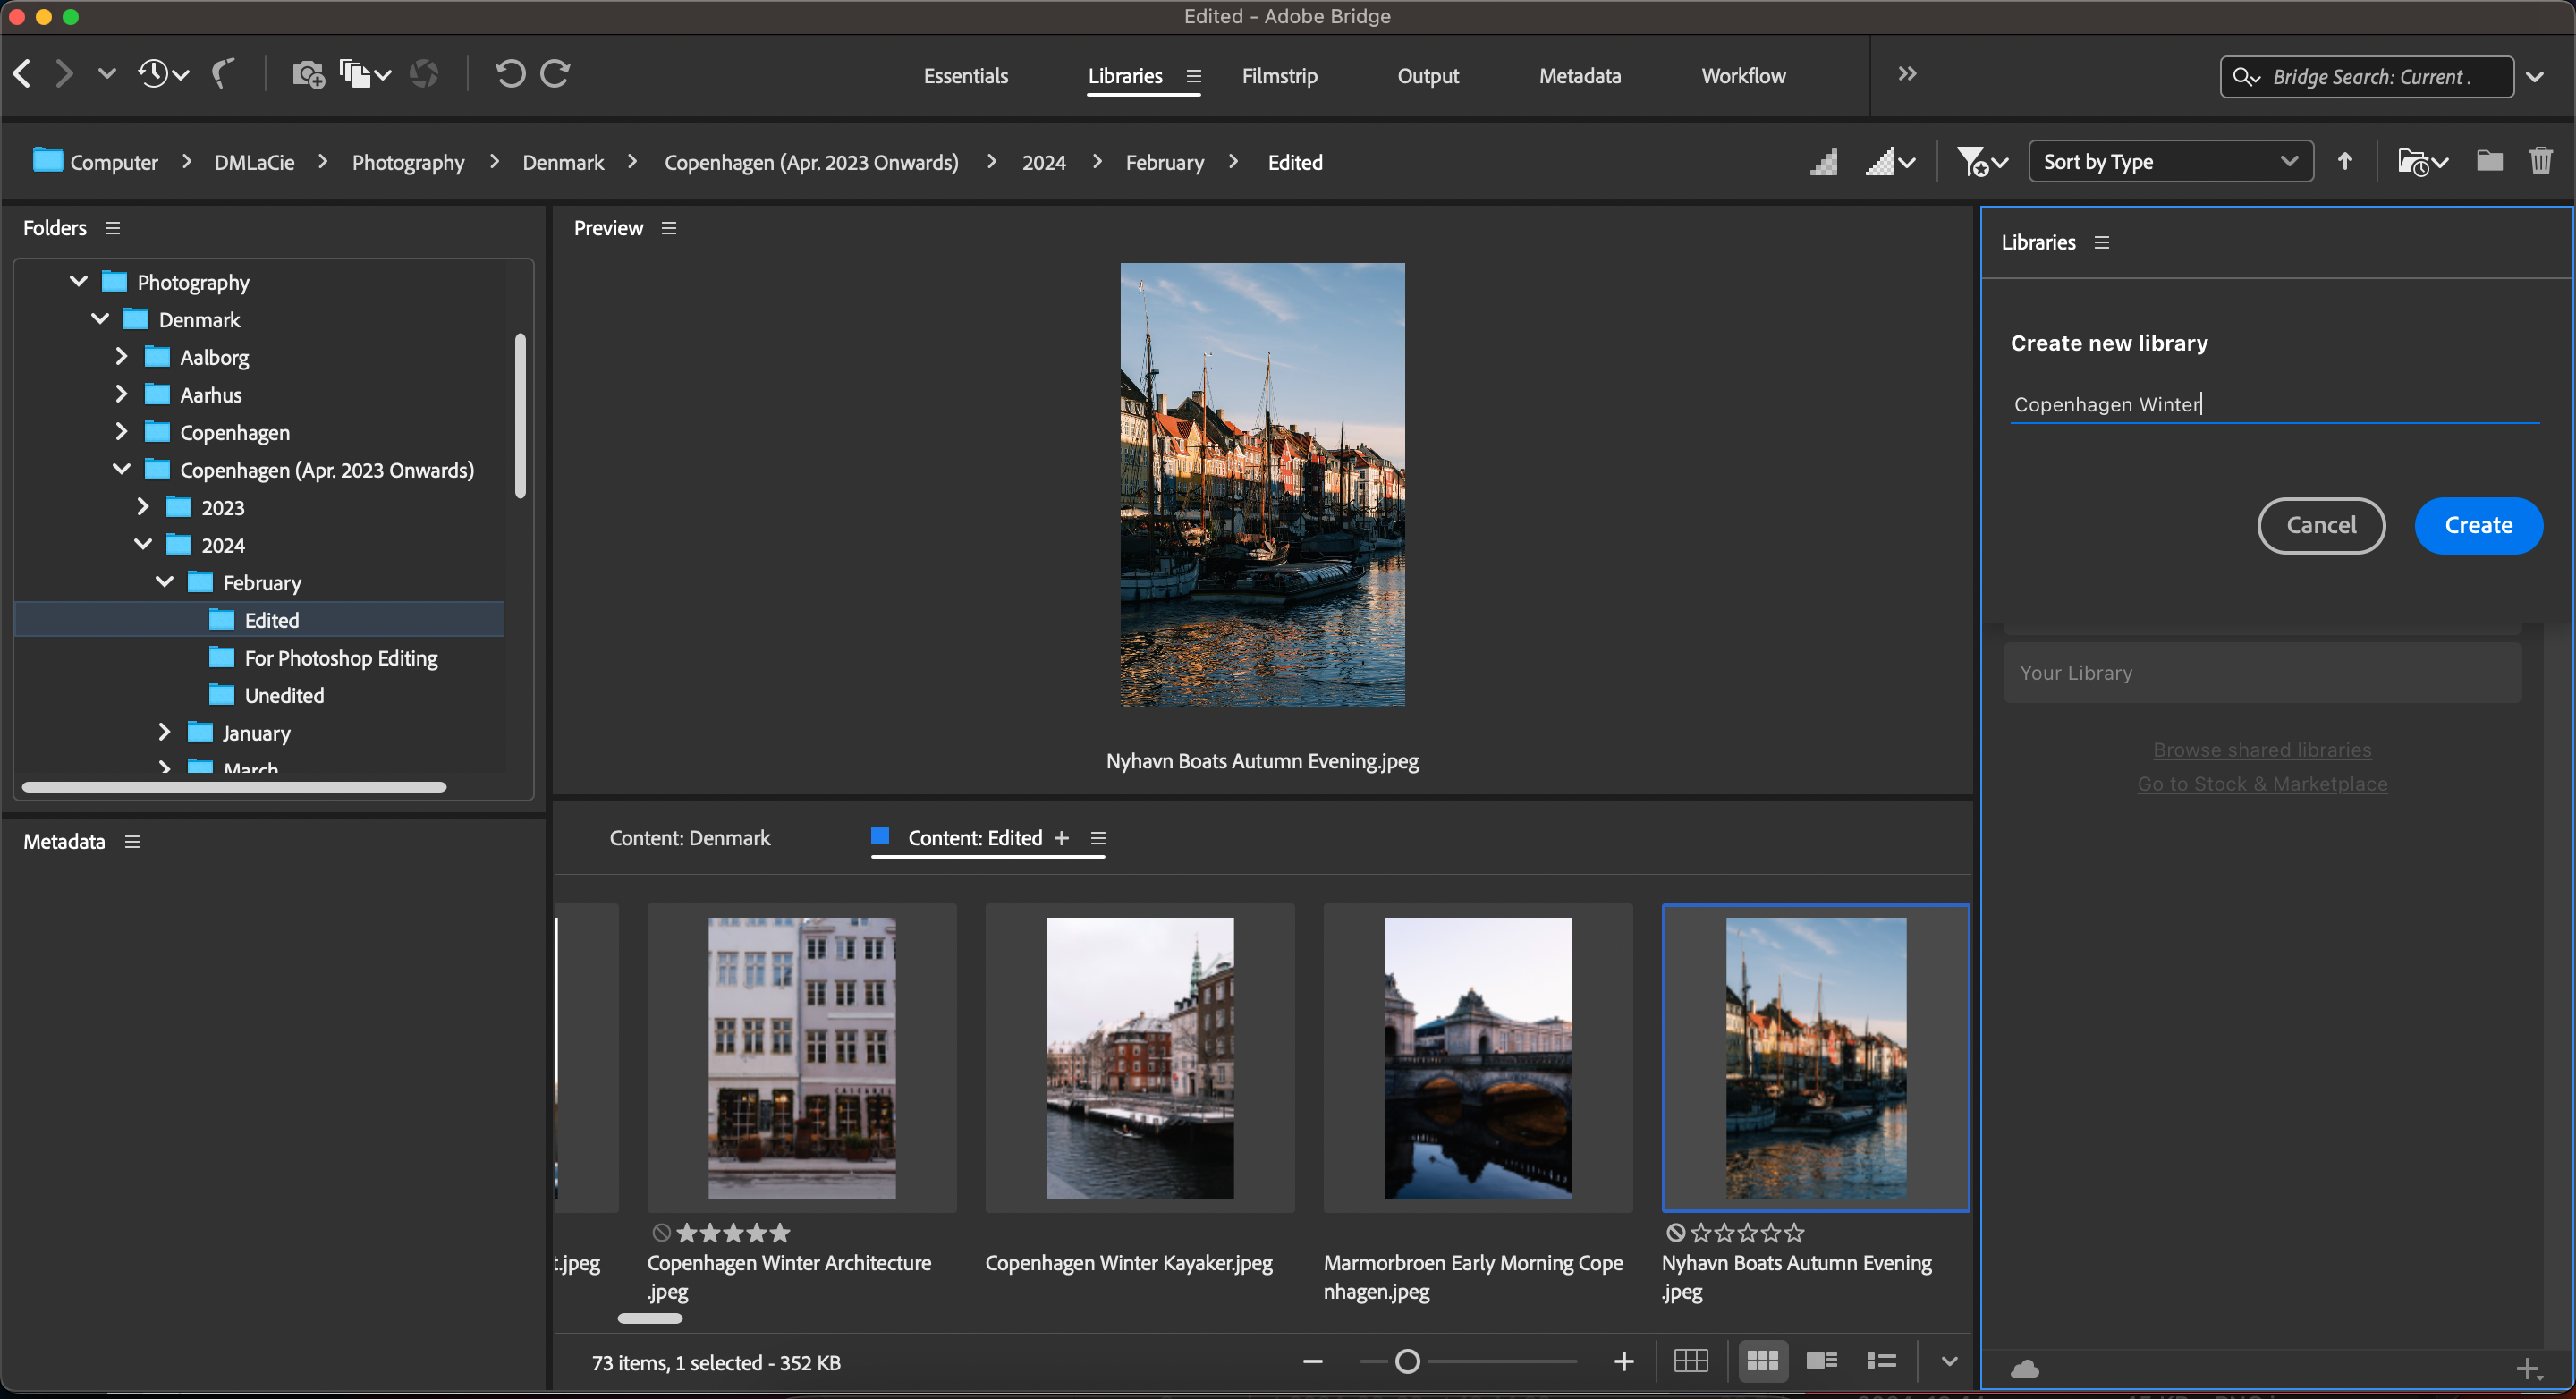 The box to create a new library in the Adobe Bridge app 